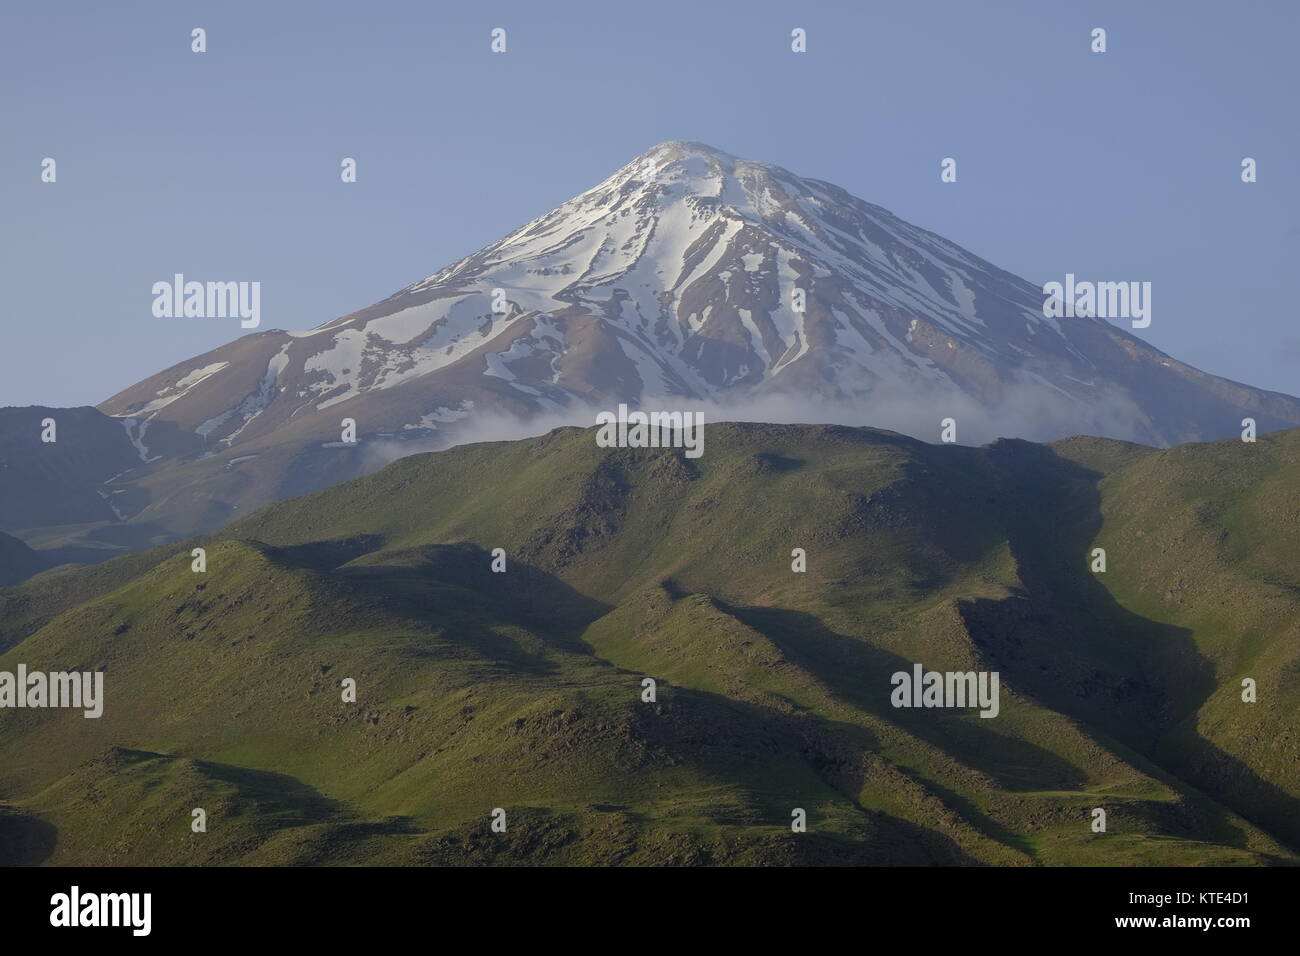 Majestic view of the highest peak in Iran called Mount Damavand Stock Photo